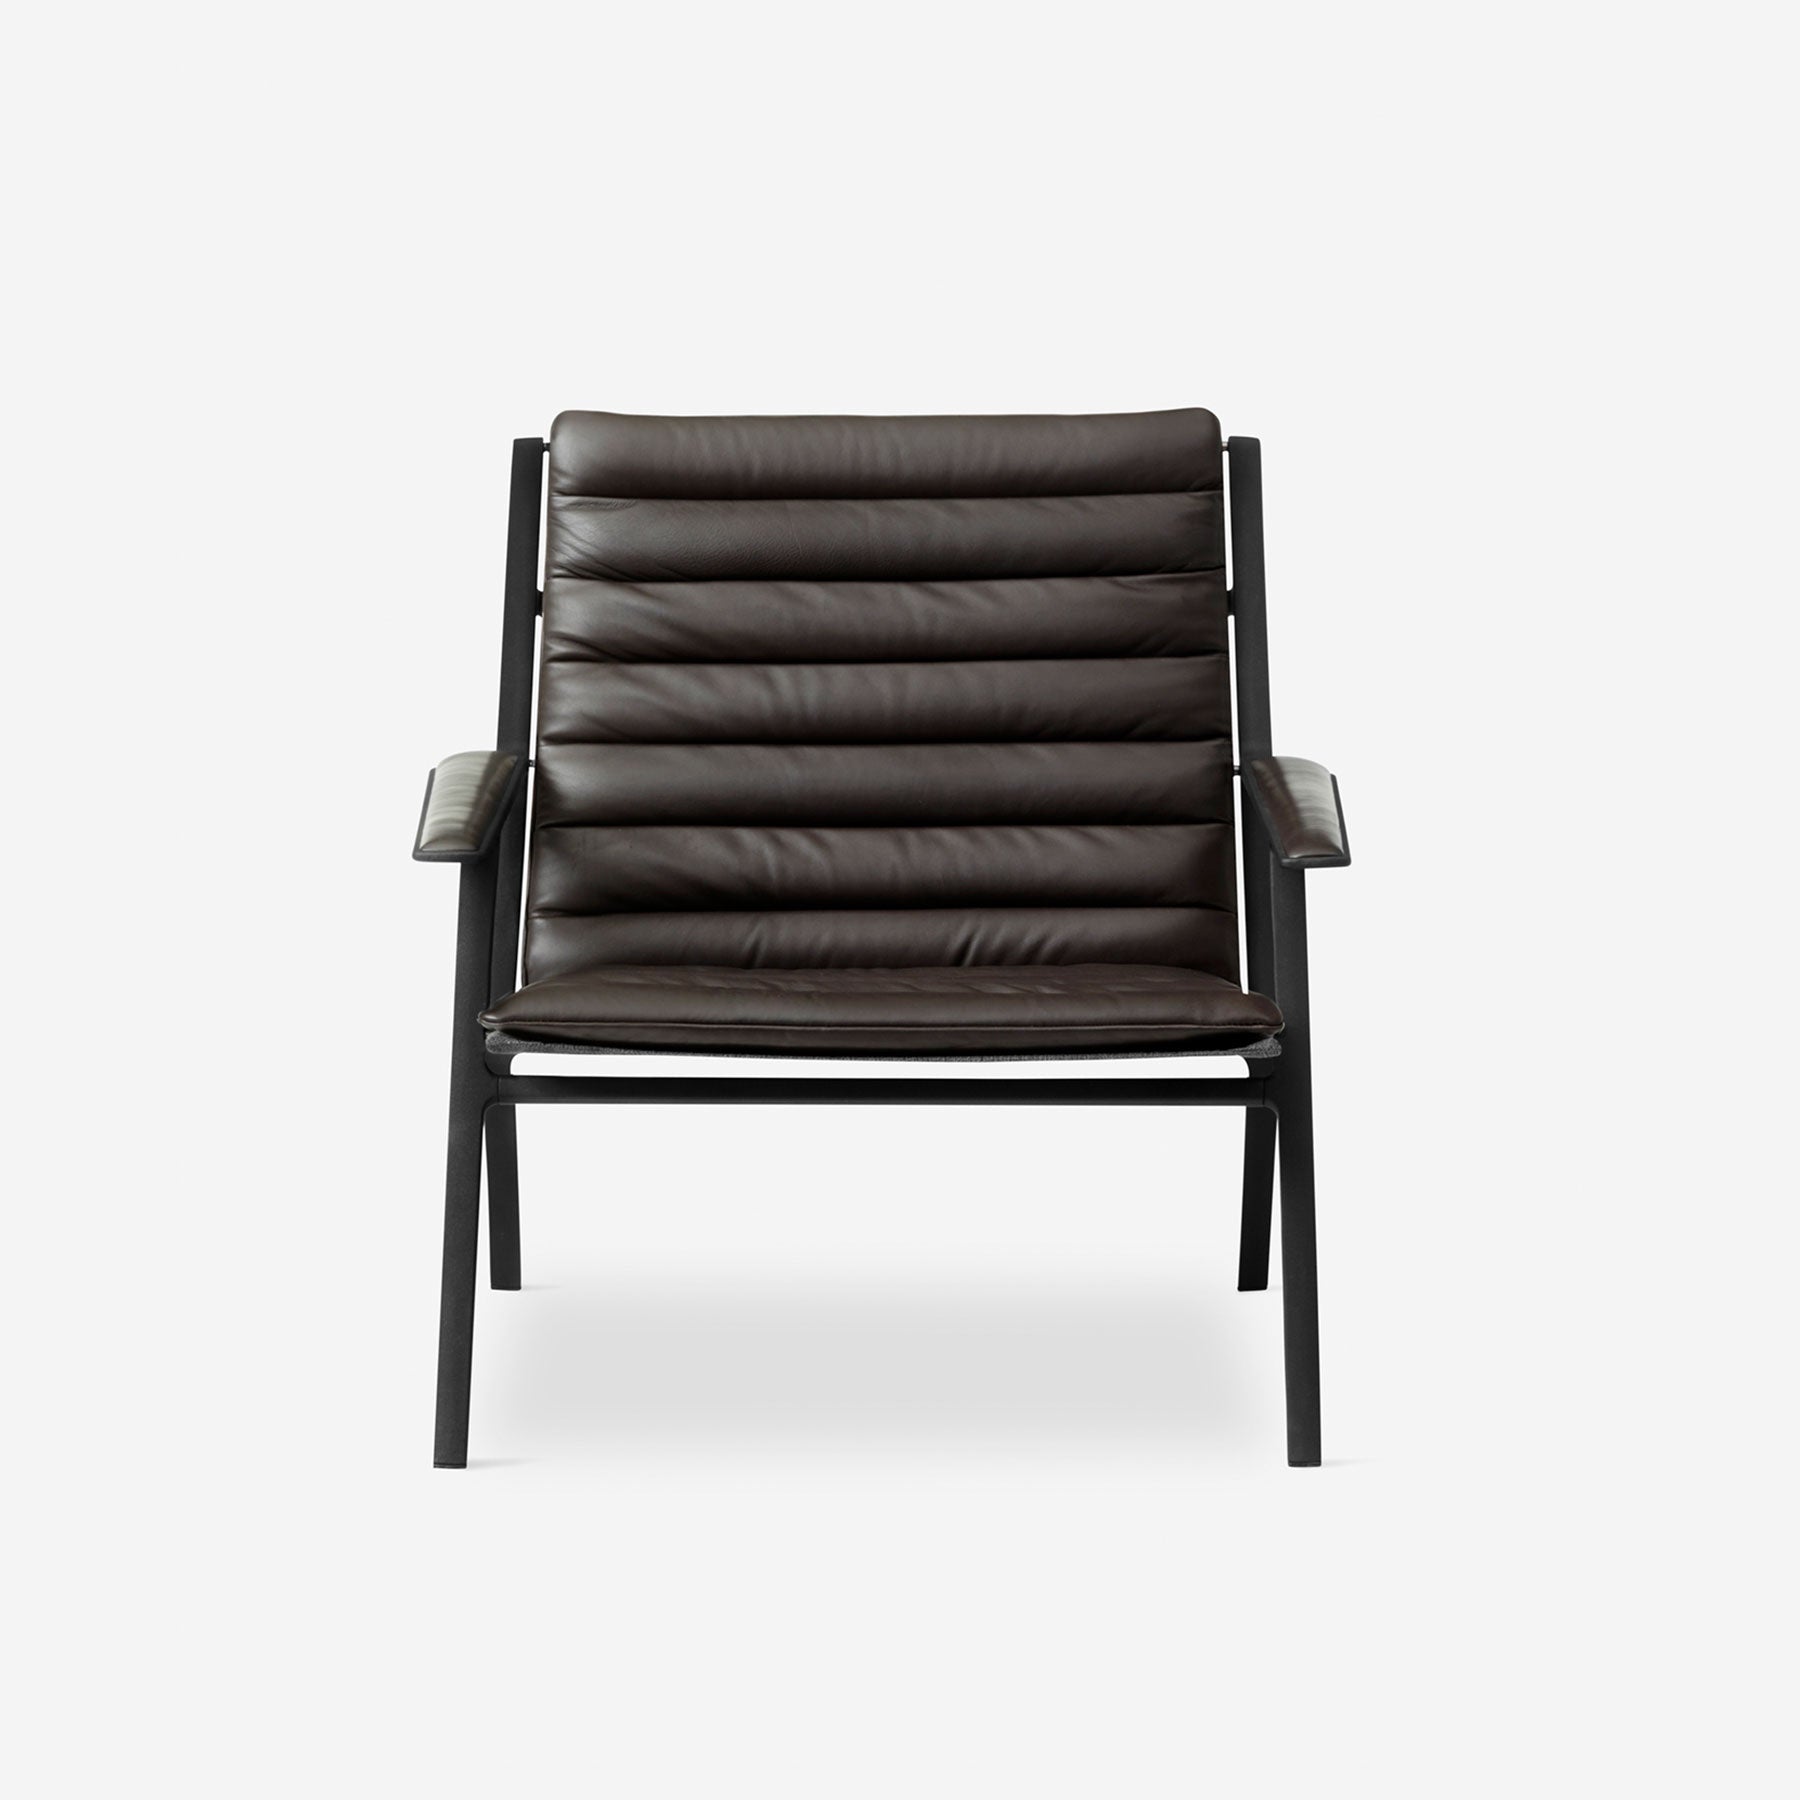 Vipp 456 Shelter Lounge Chair